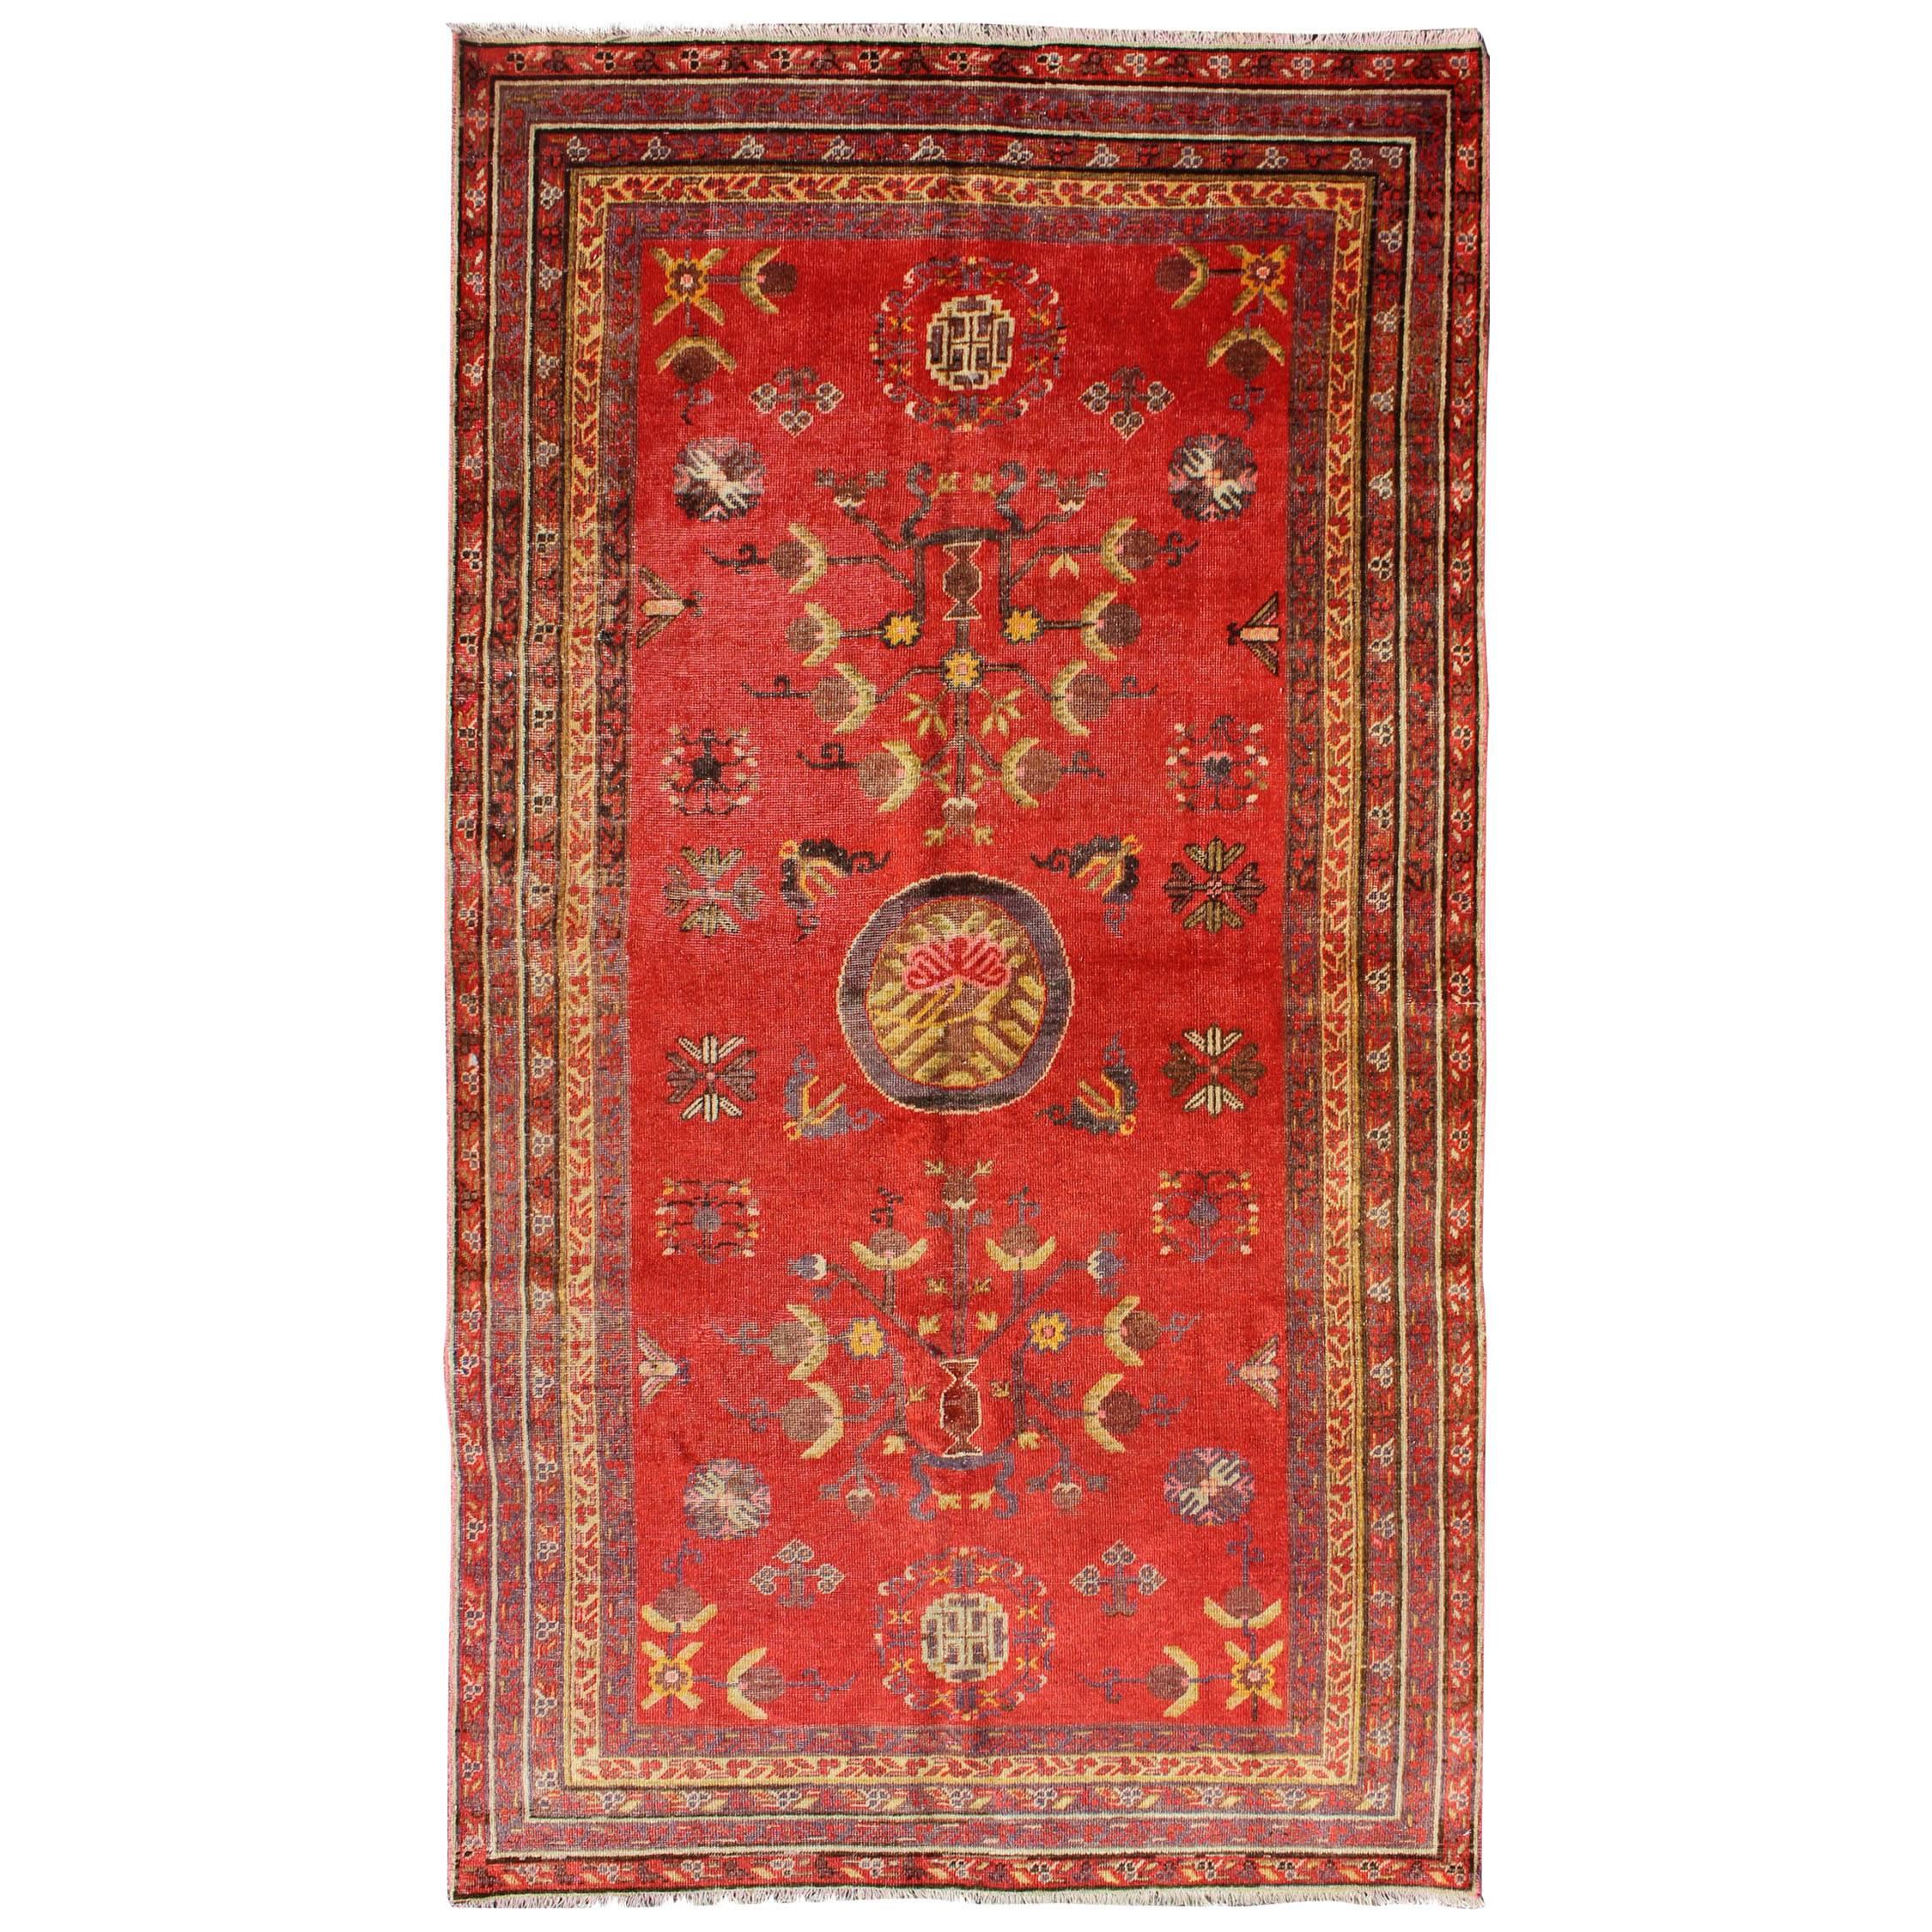 Vibrant Khotan Rug in Red with All-Over Sub-Geometric Floral Design